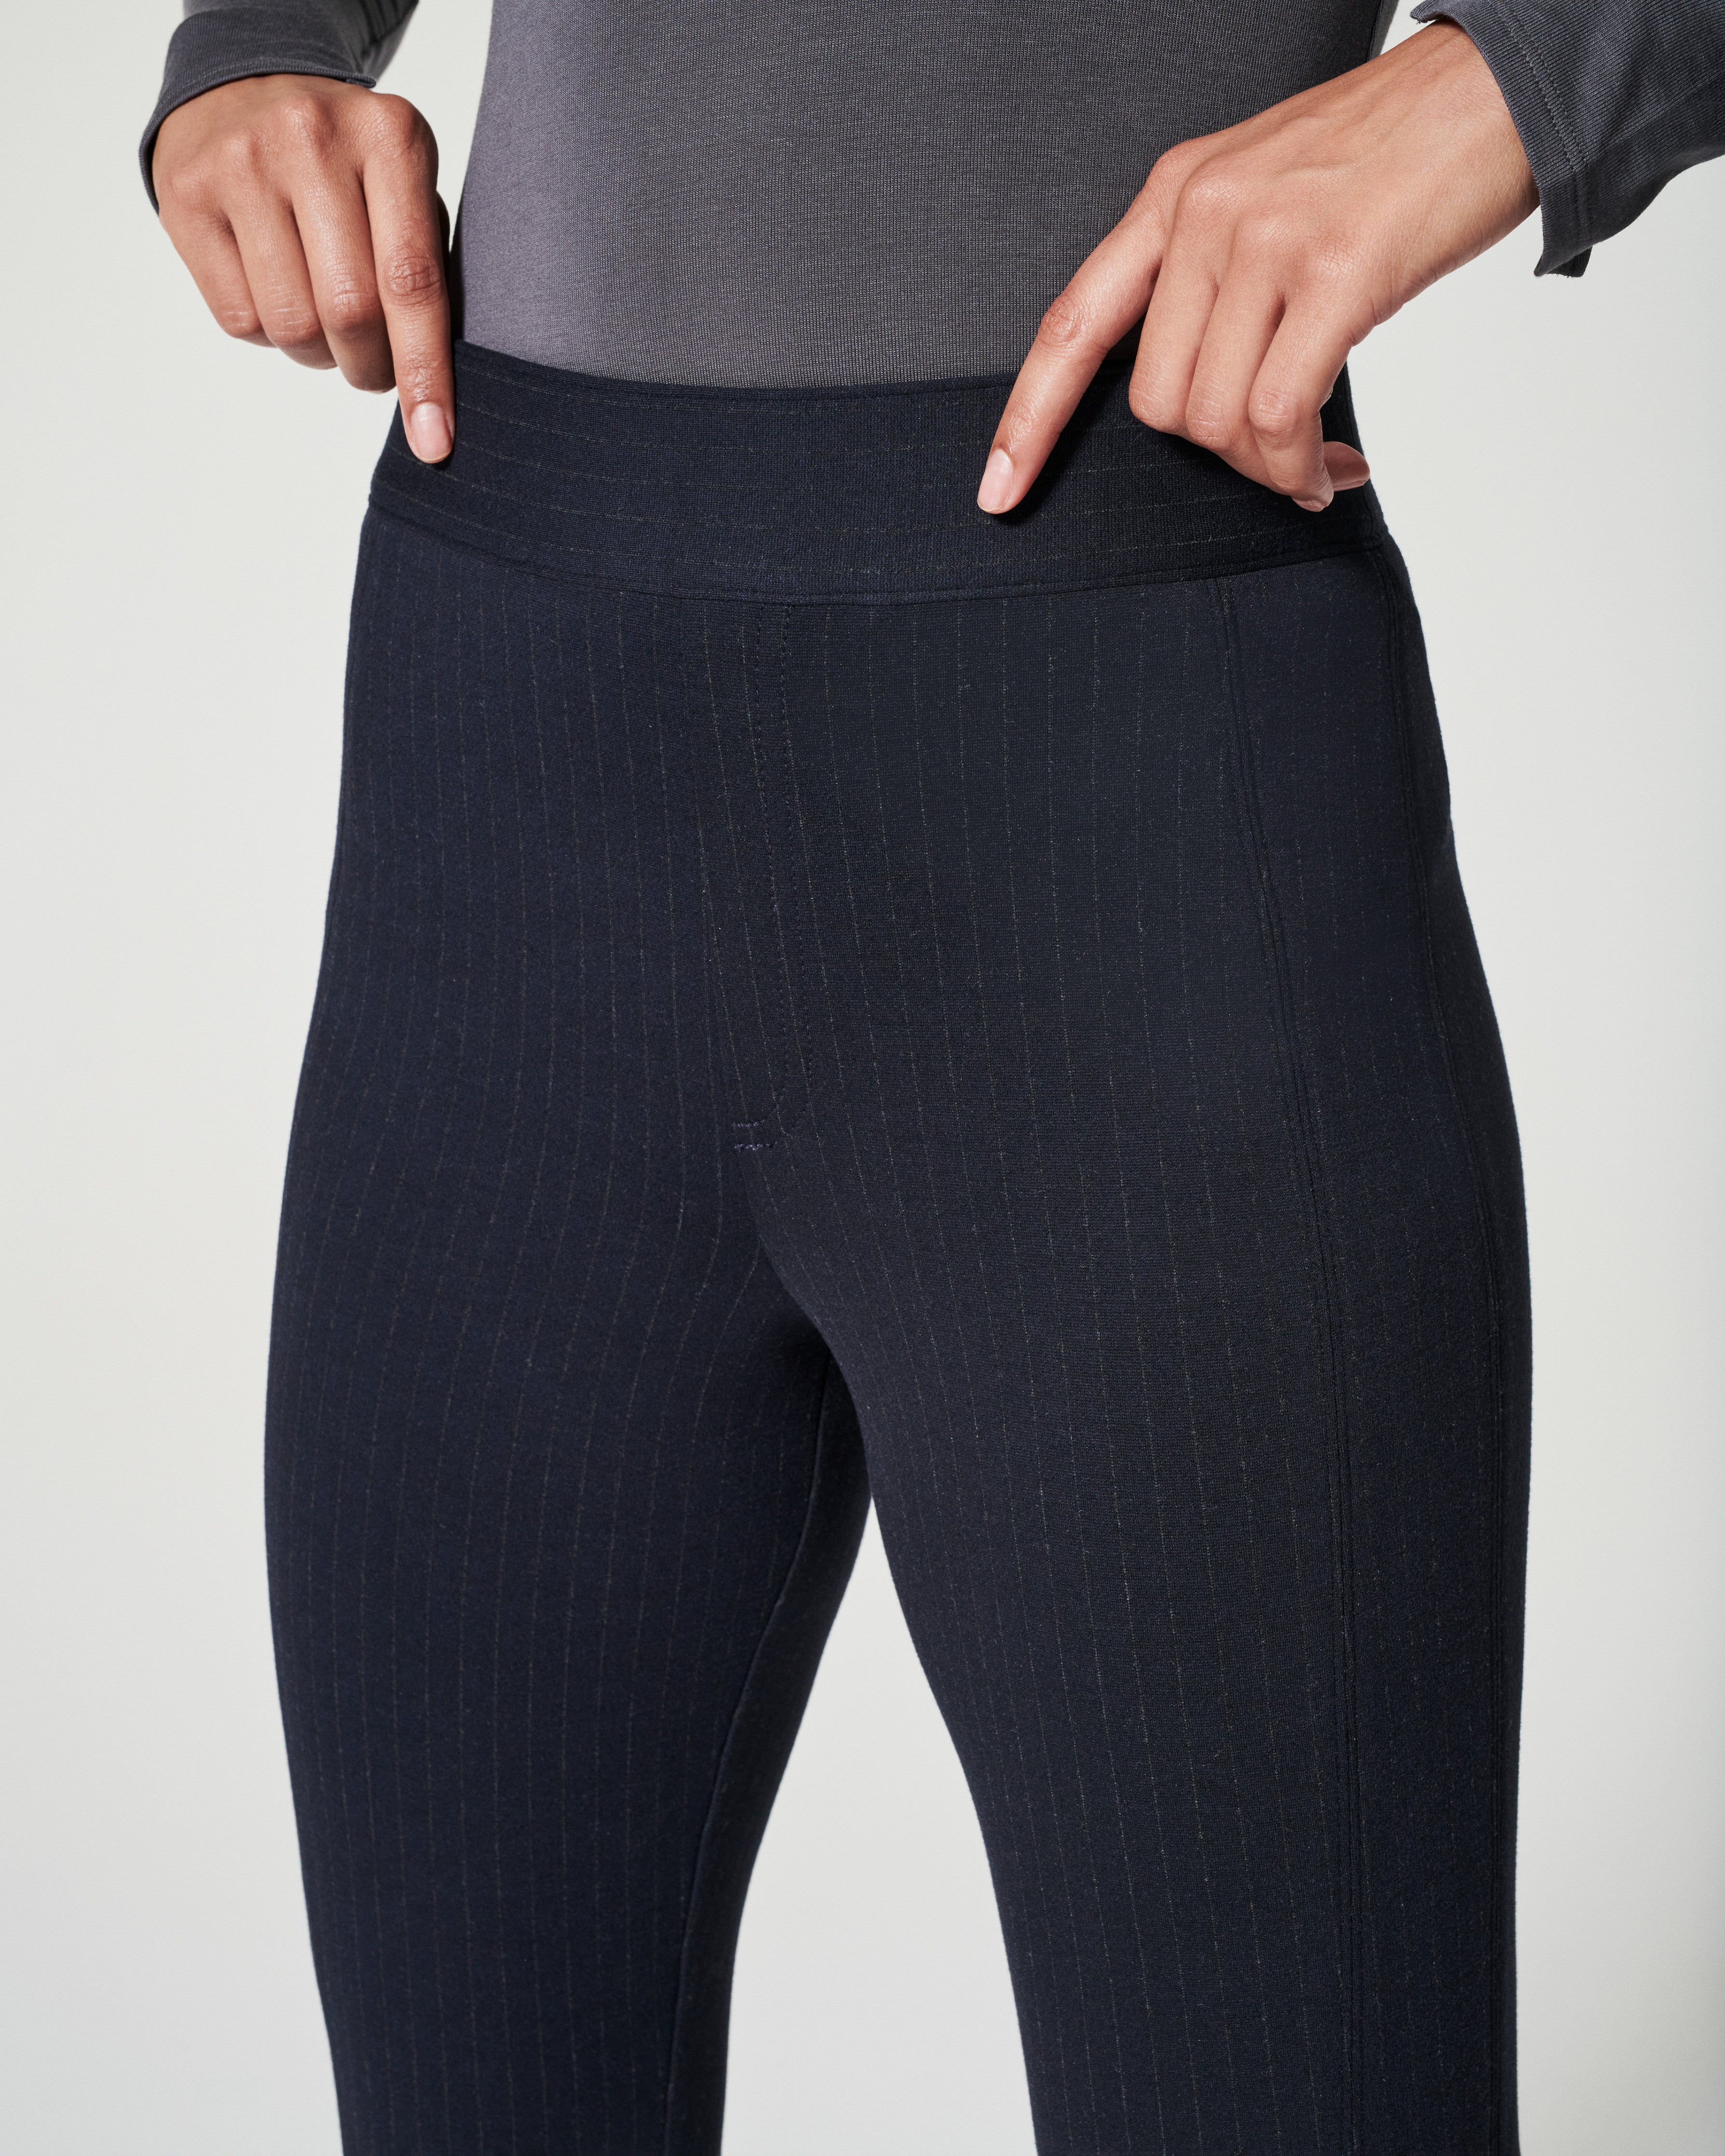 SPANX - Meet the Perfect Pant made with 100% buttery-softness and hidden  tummy shaping. AKA Best. Pants. EVER! Shop now at